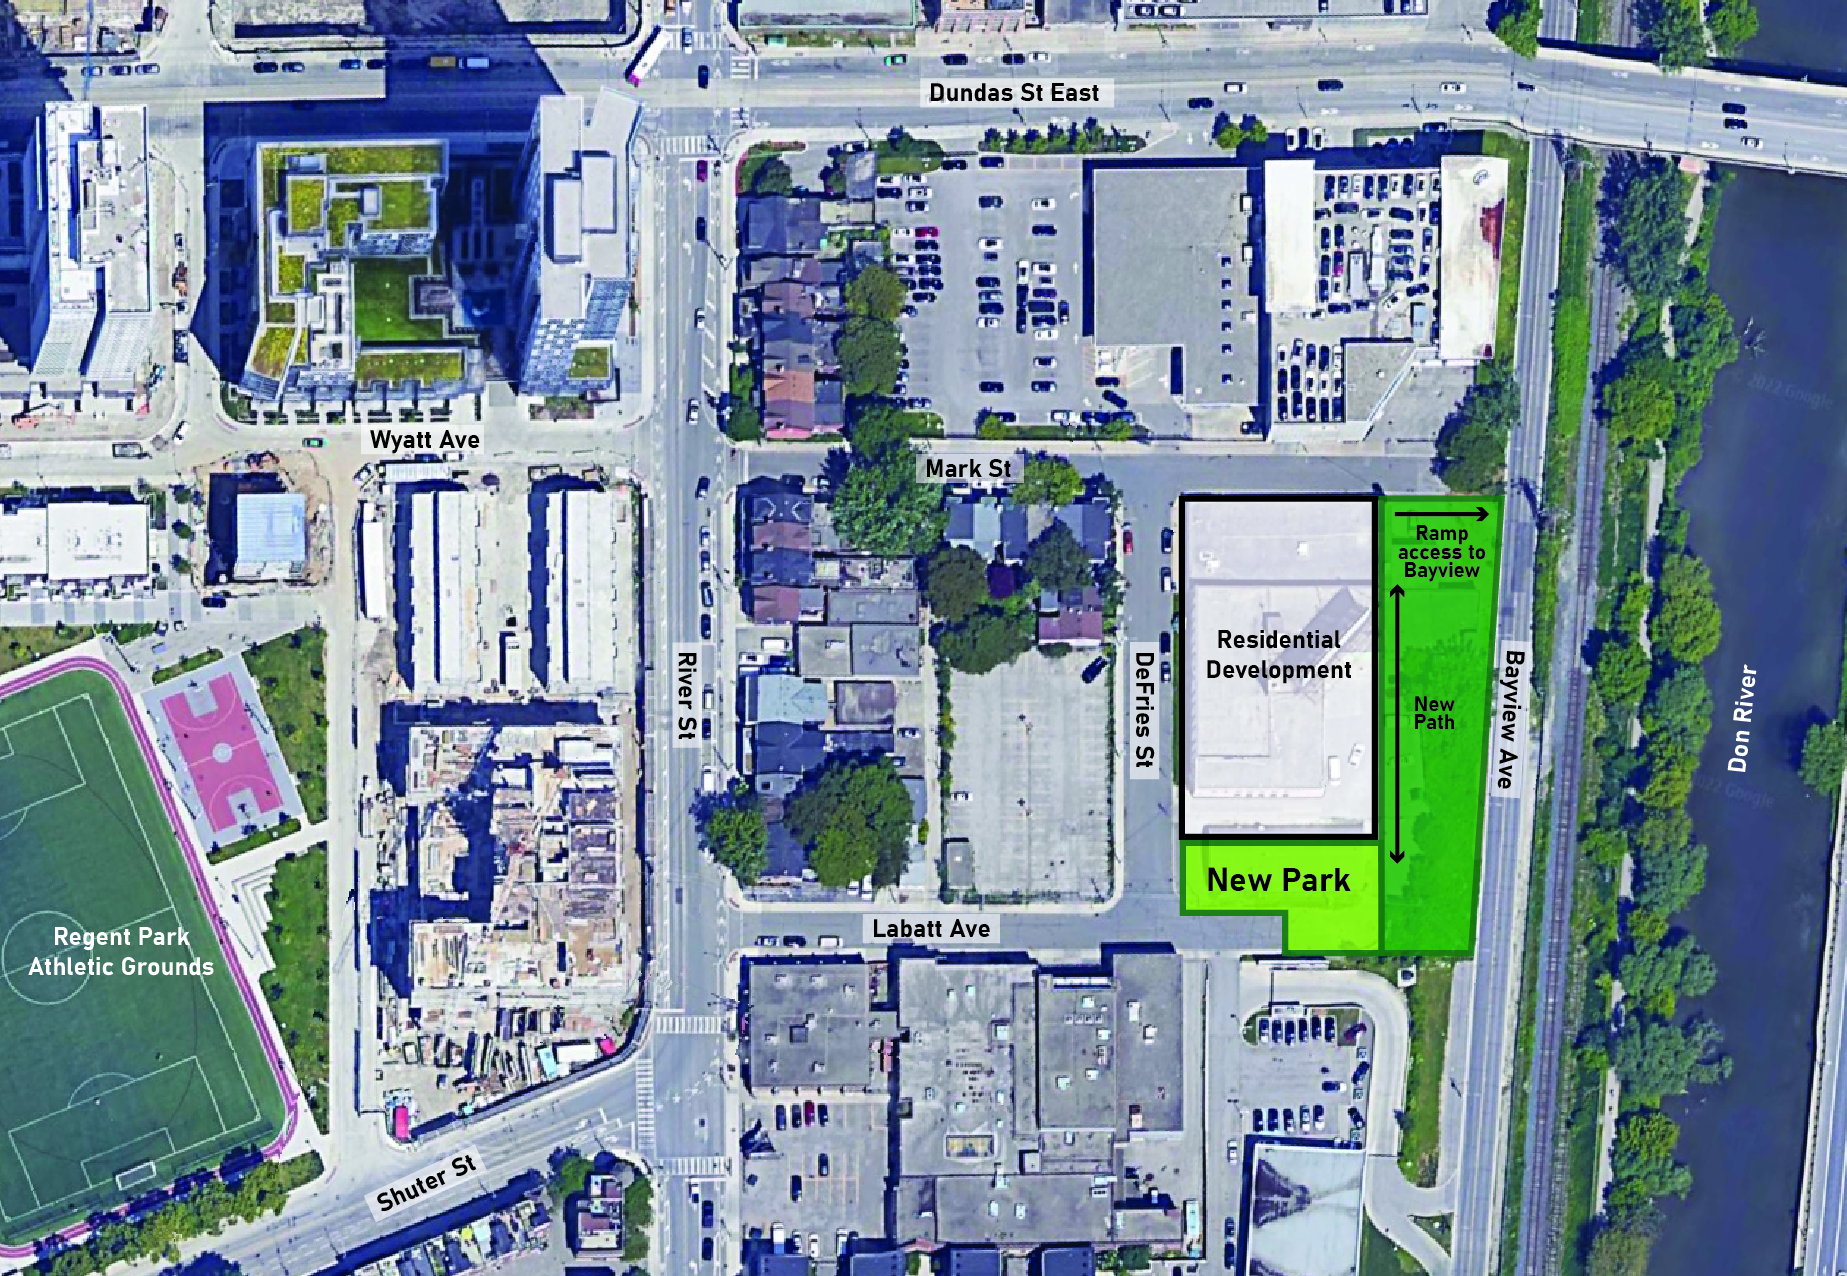 An aerial map showing the location of the new park in light green, which is bounded by residential development to the north, DeFries Street to the west, Labatt Ave to the south, and open space to the east. The location of a new path parallel to Bayview Avenue is show in dark green. 